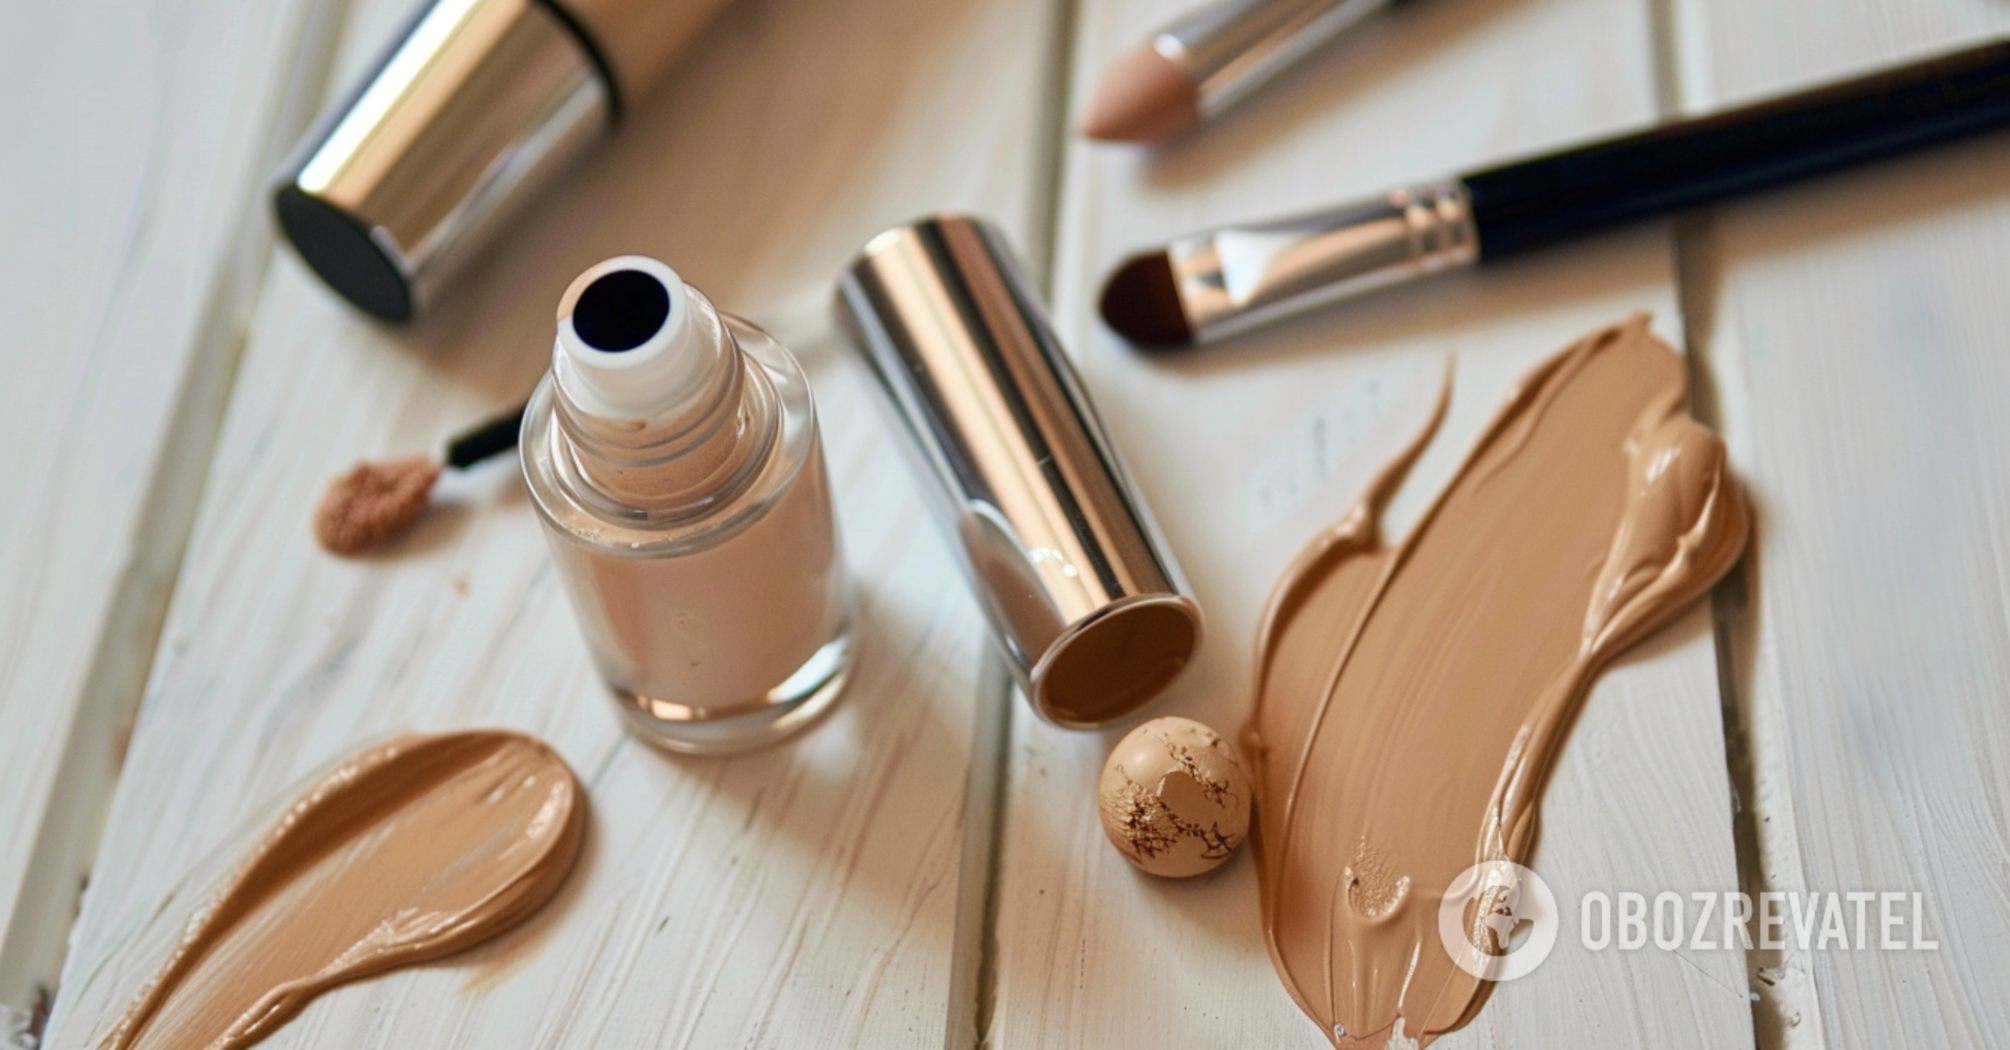 Instantly tightens the face: how to use concealer correctly